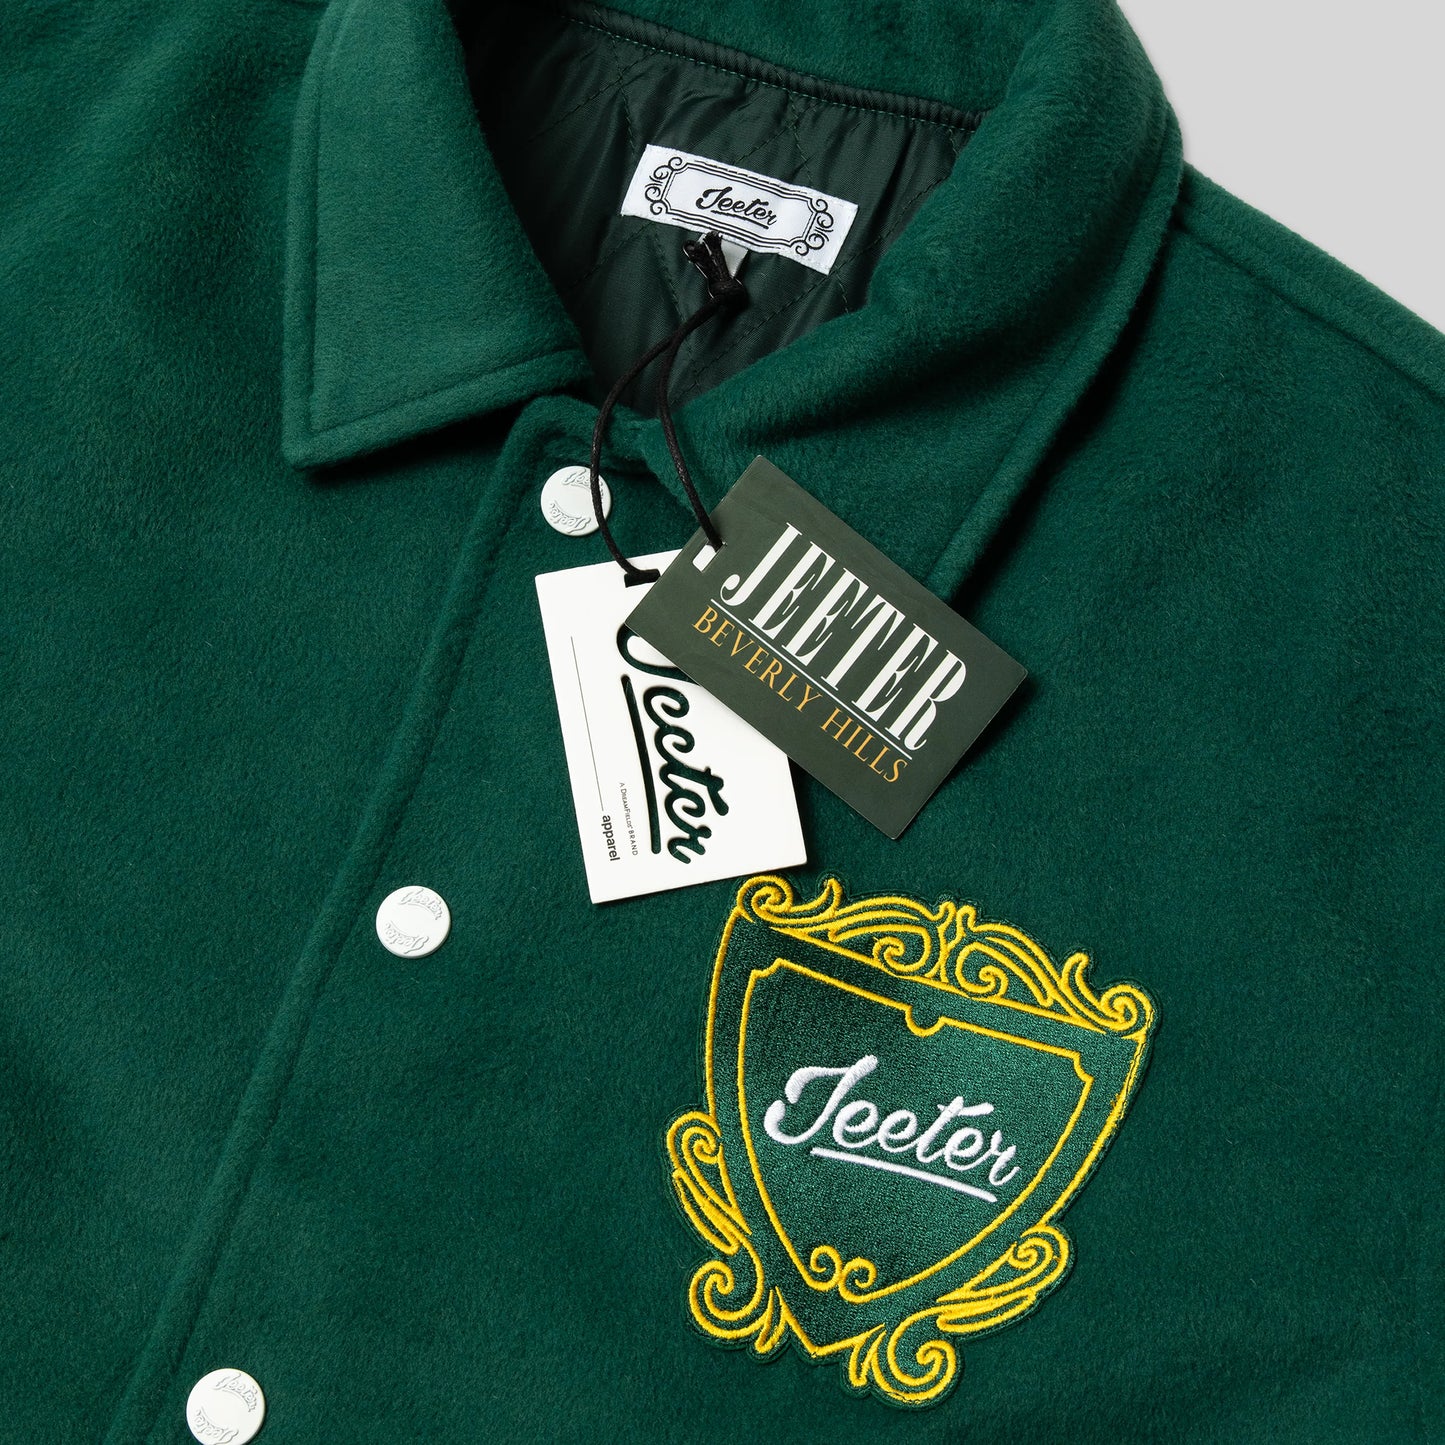 The Green Jacket